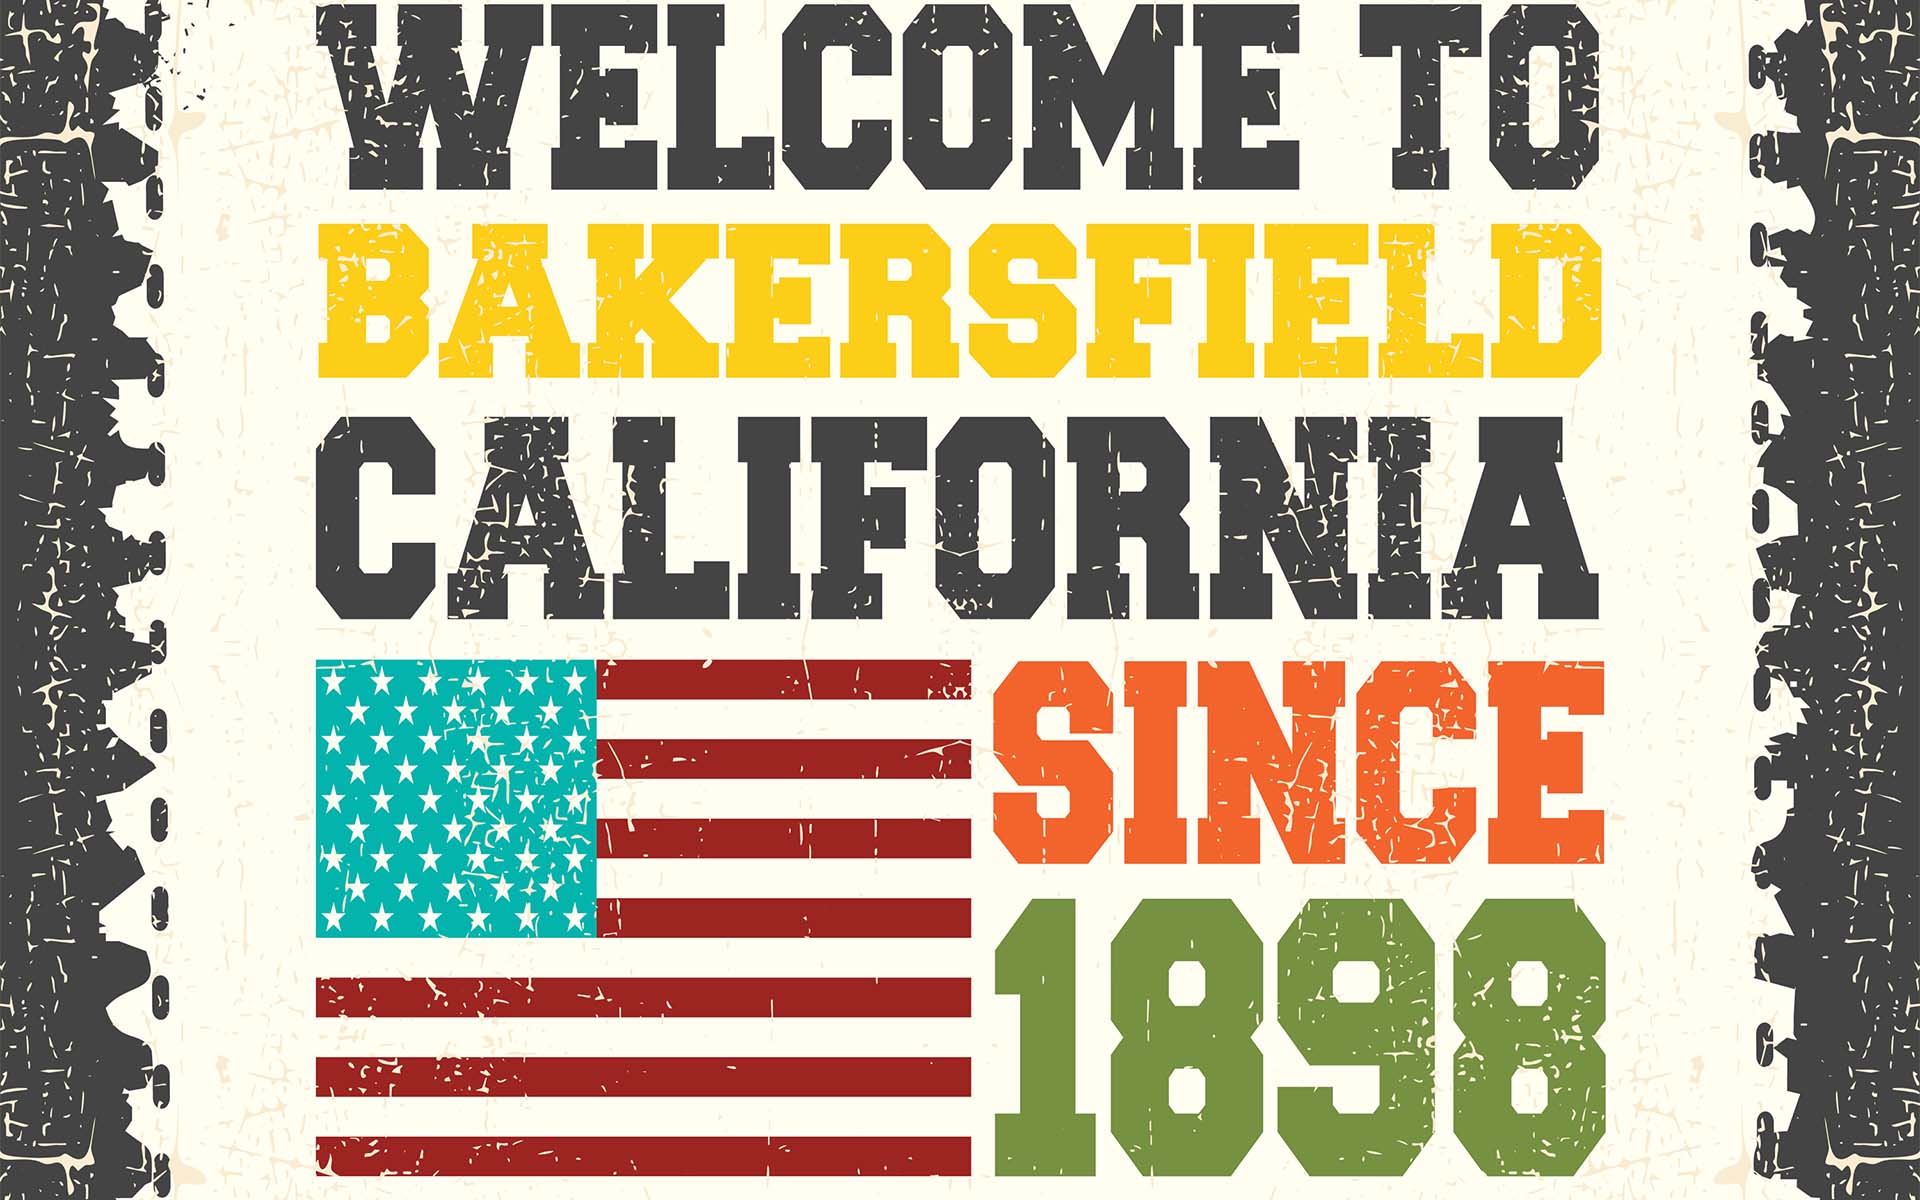 Bakersfield California since 1898 - SEO services for local business Kern County Bakersfield Tehachapi SEO